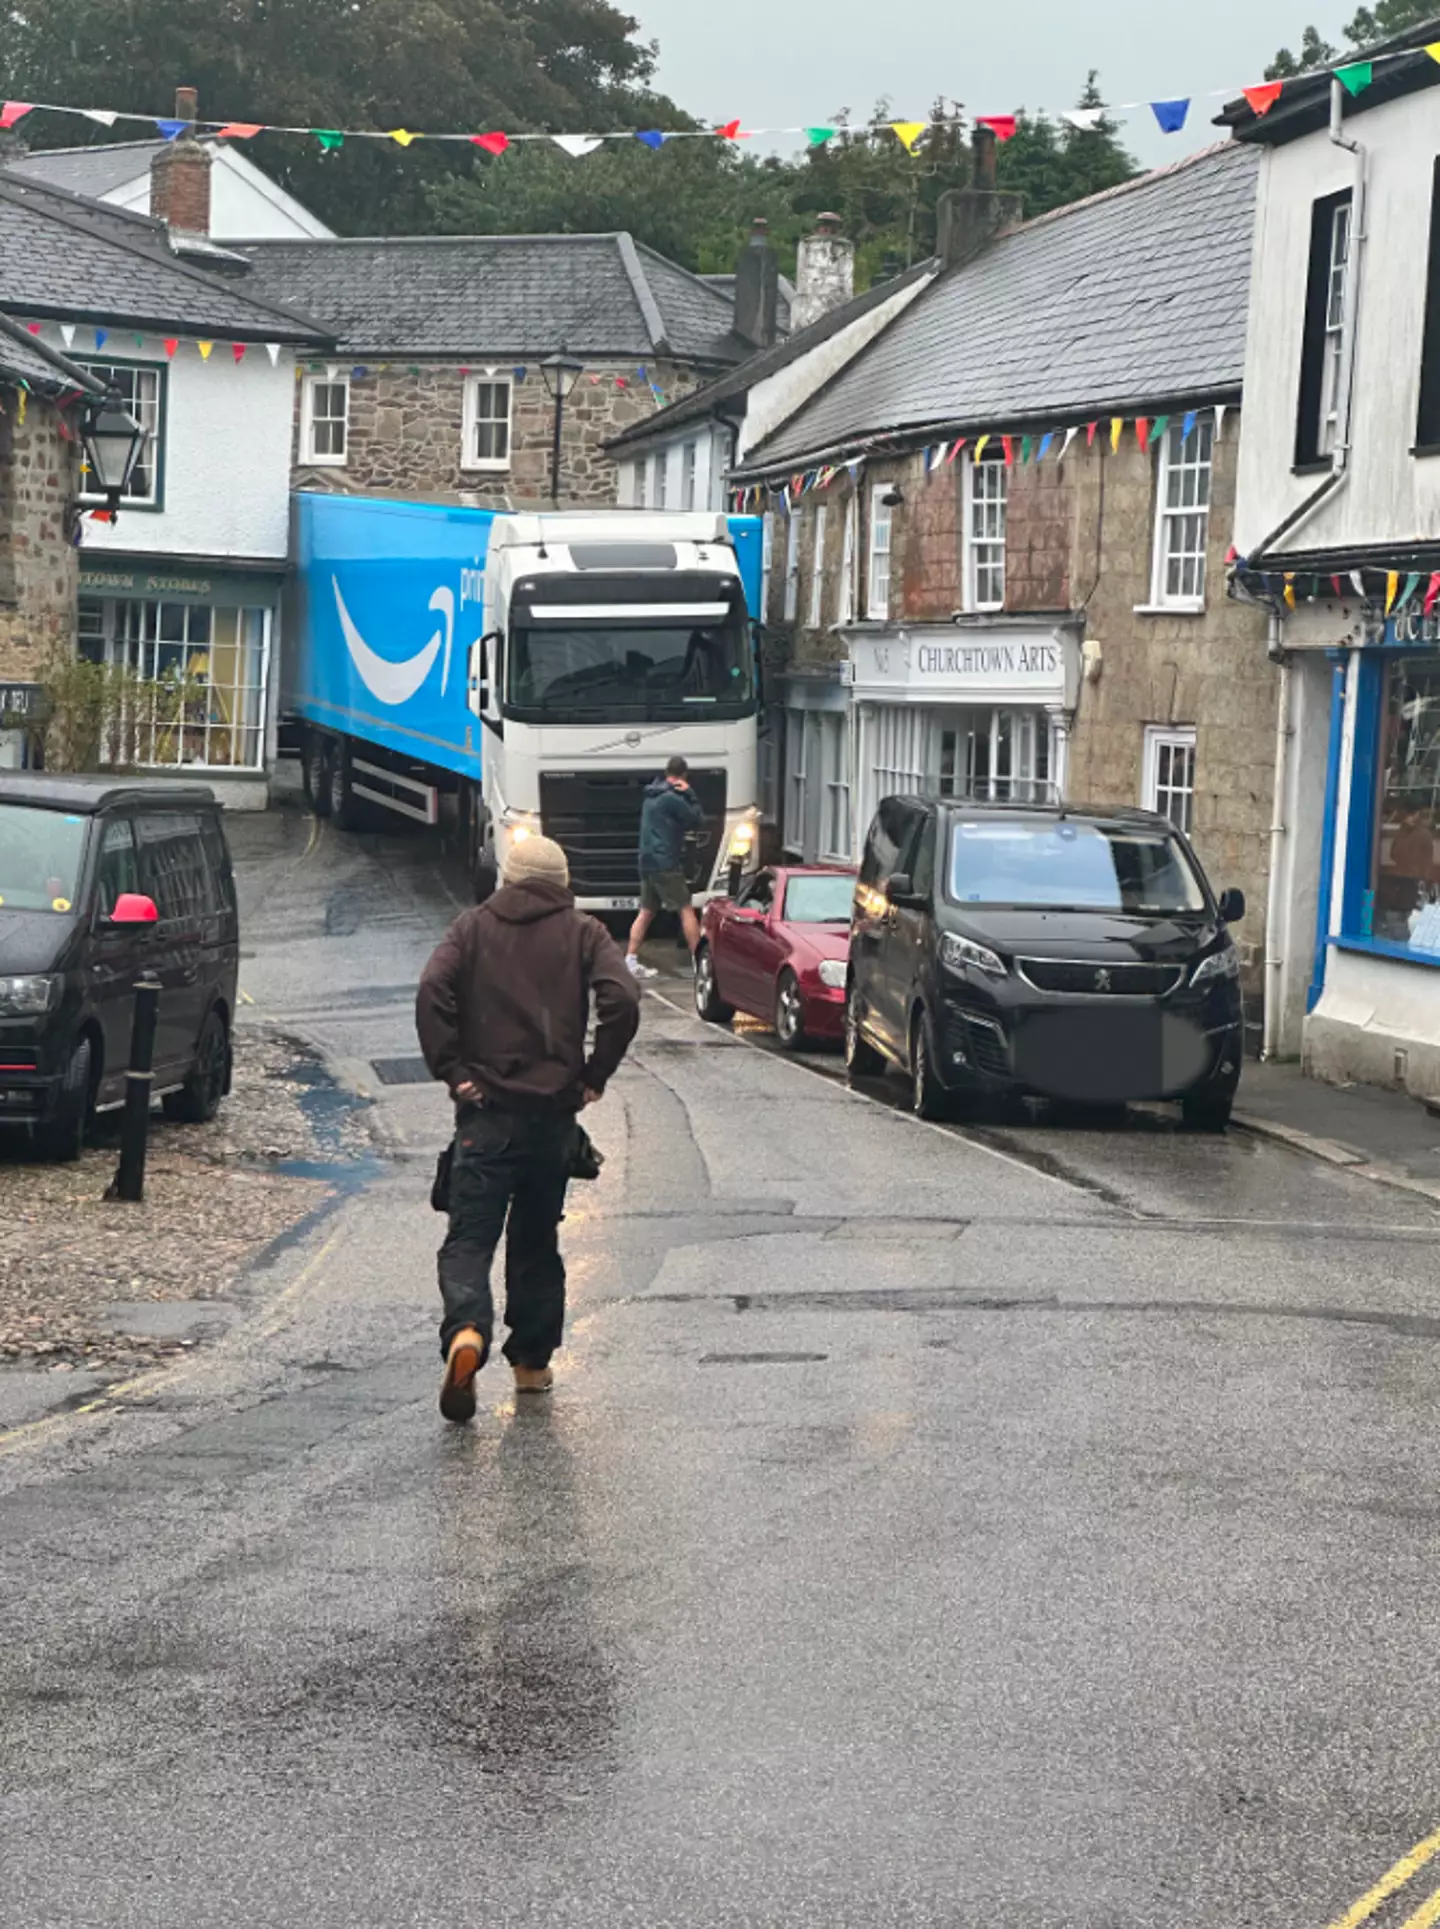 The driver had put his faith in his sat-nav which sent him down an incredibly narrow road.